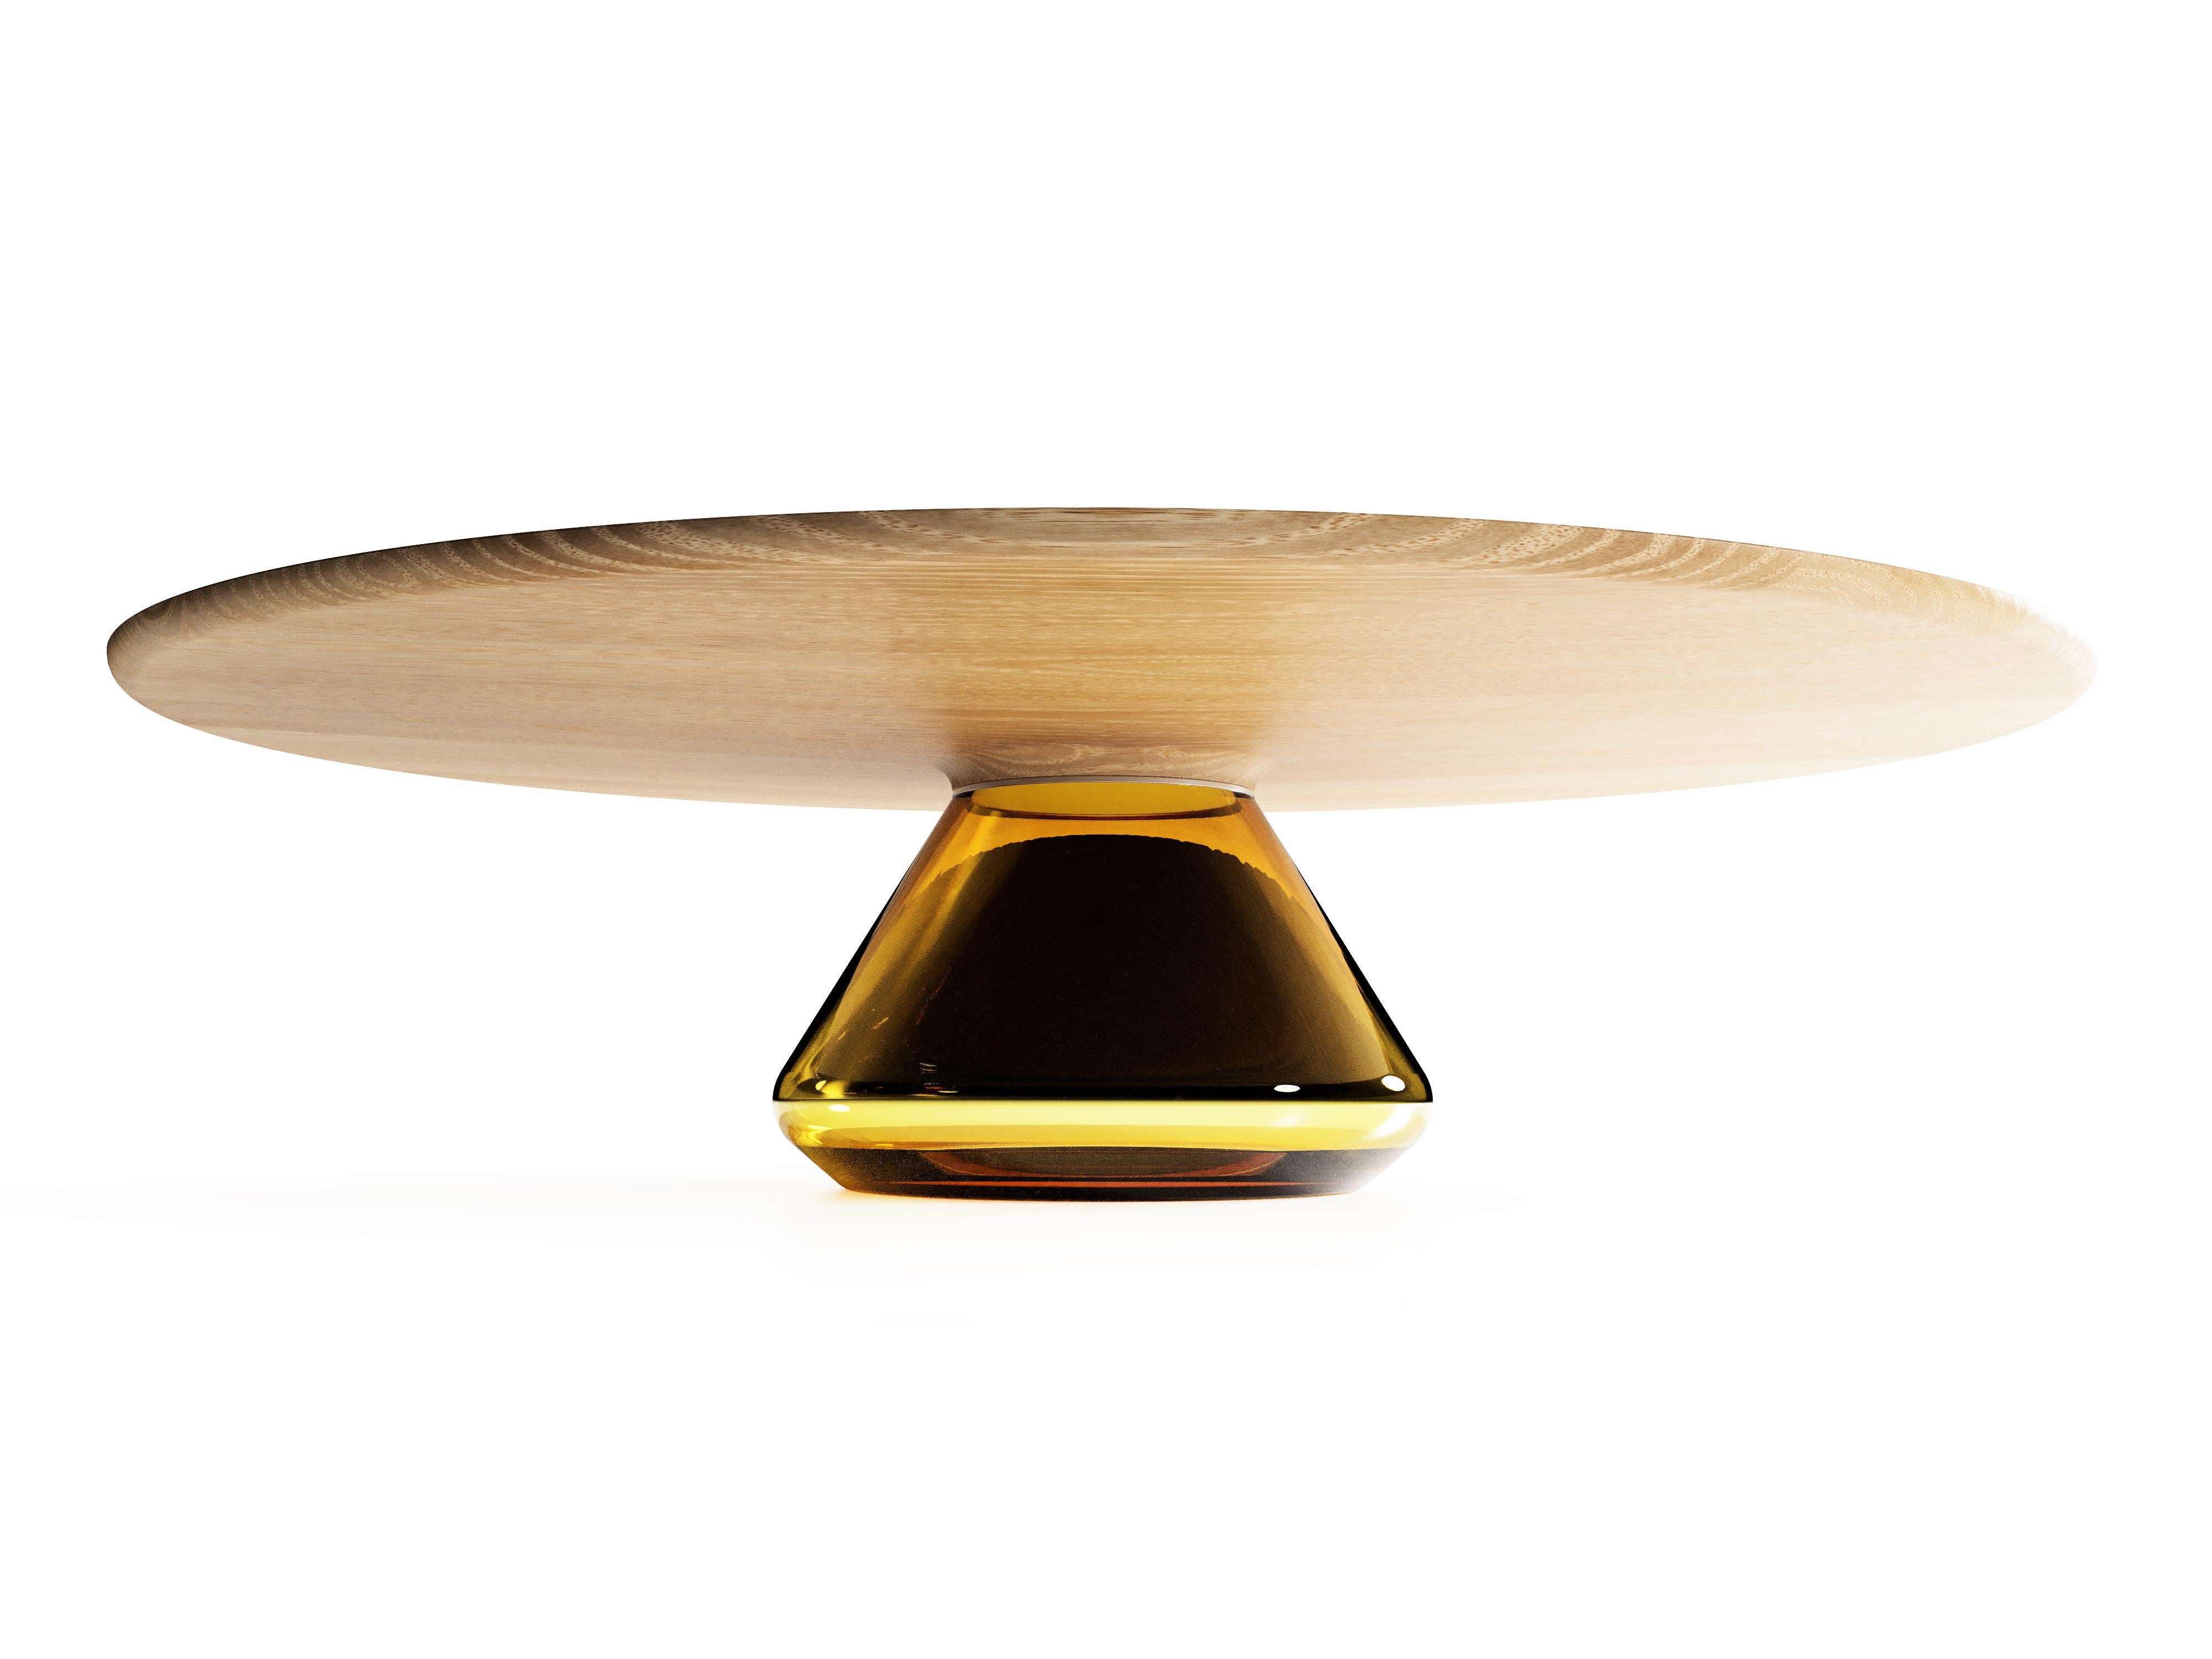 British The Amber Eclipse I, Limited Edition Coffee Table by Grzegorz Majka